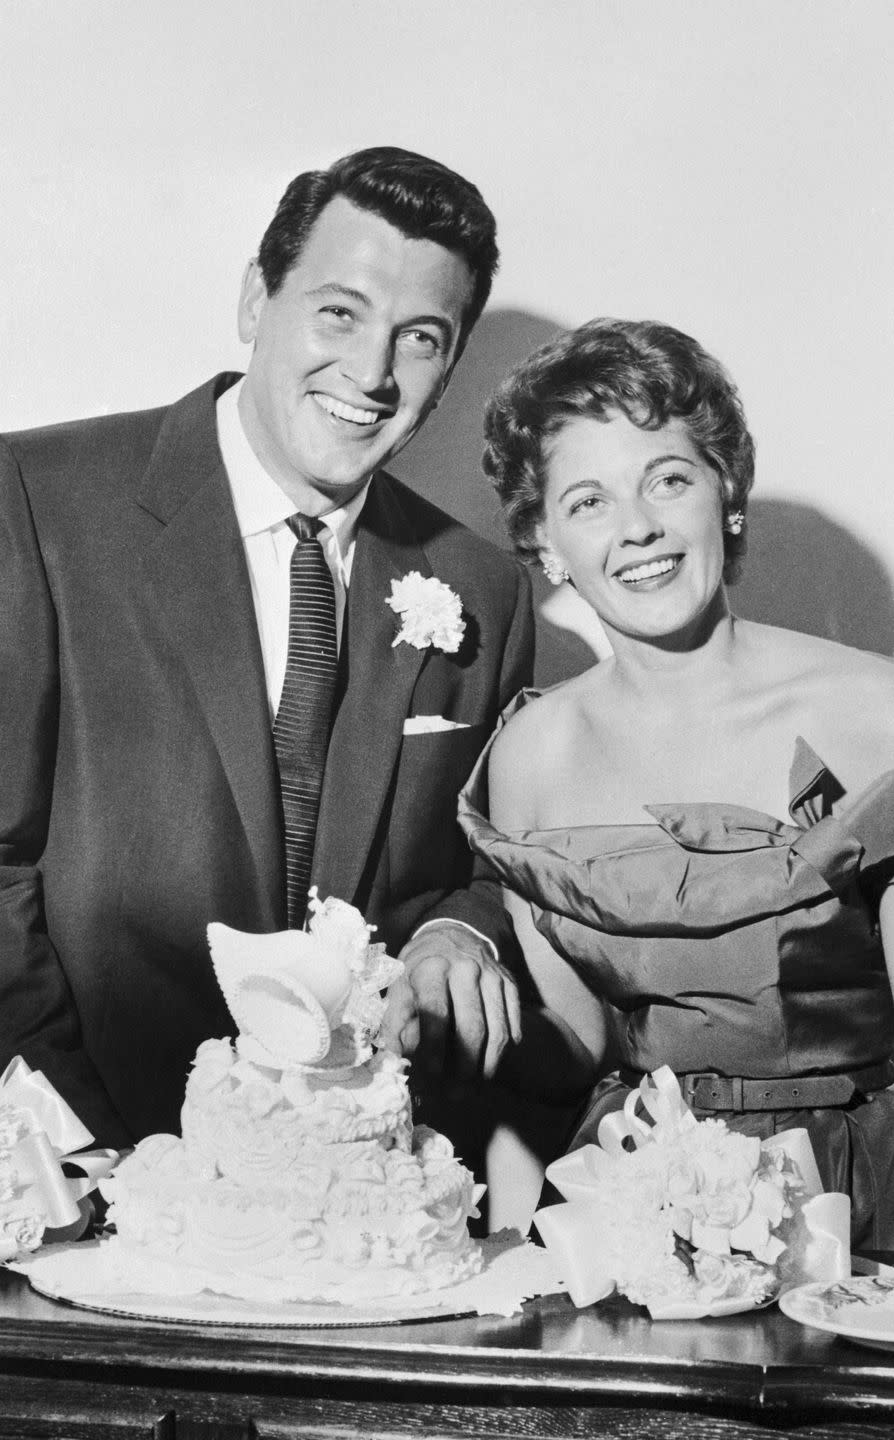 1955: Rock Hudson's short, one-and-only marriage before he comes out 30 years later